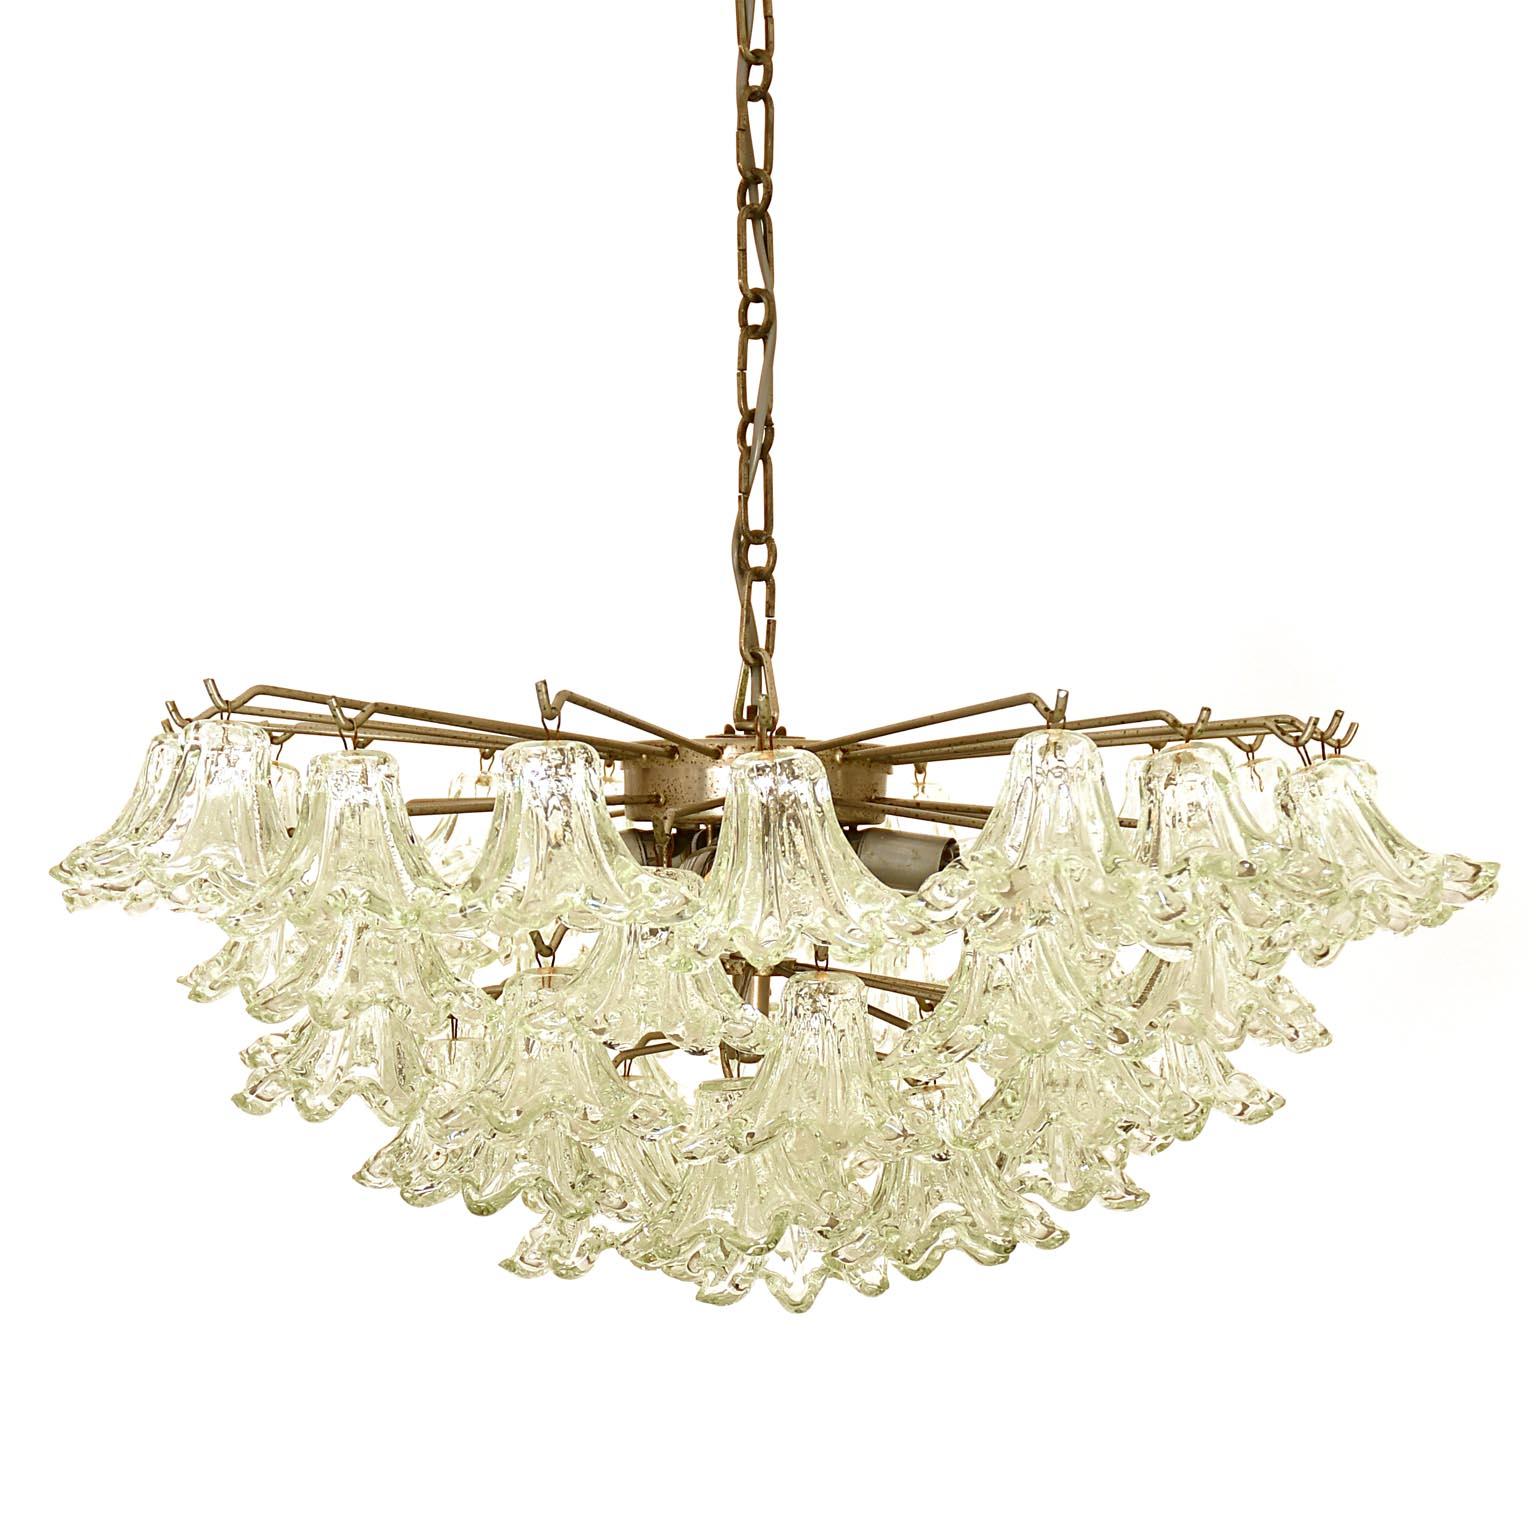 Mid-century glass chandelier from Italy. Nickel plated base with glass blossoms. Each blossom is fixed with a tiny metal ring.
The height of the chandelier without the chain is 24 cm / 9.45 in. We found this piece in a house near Venice and